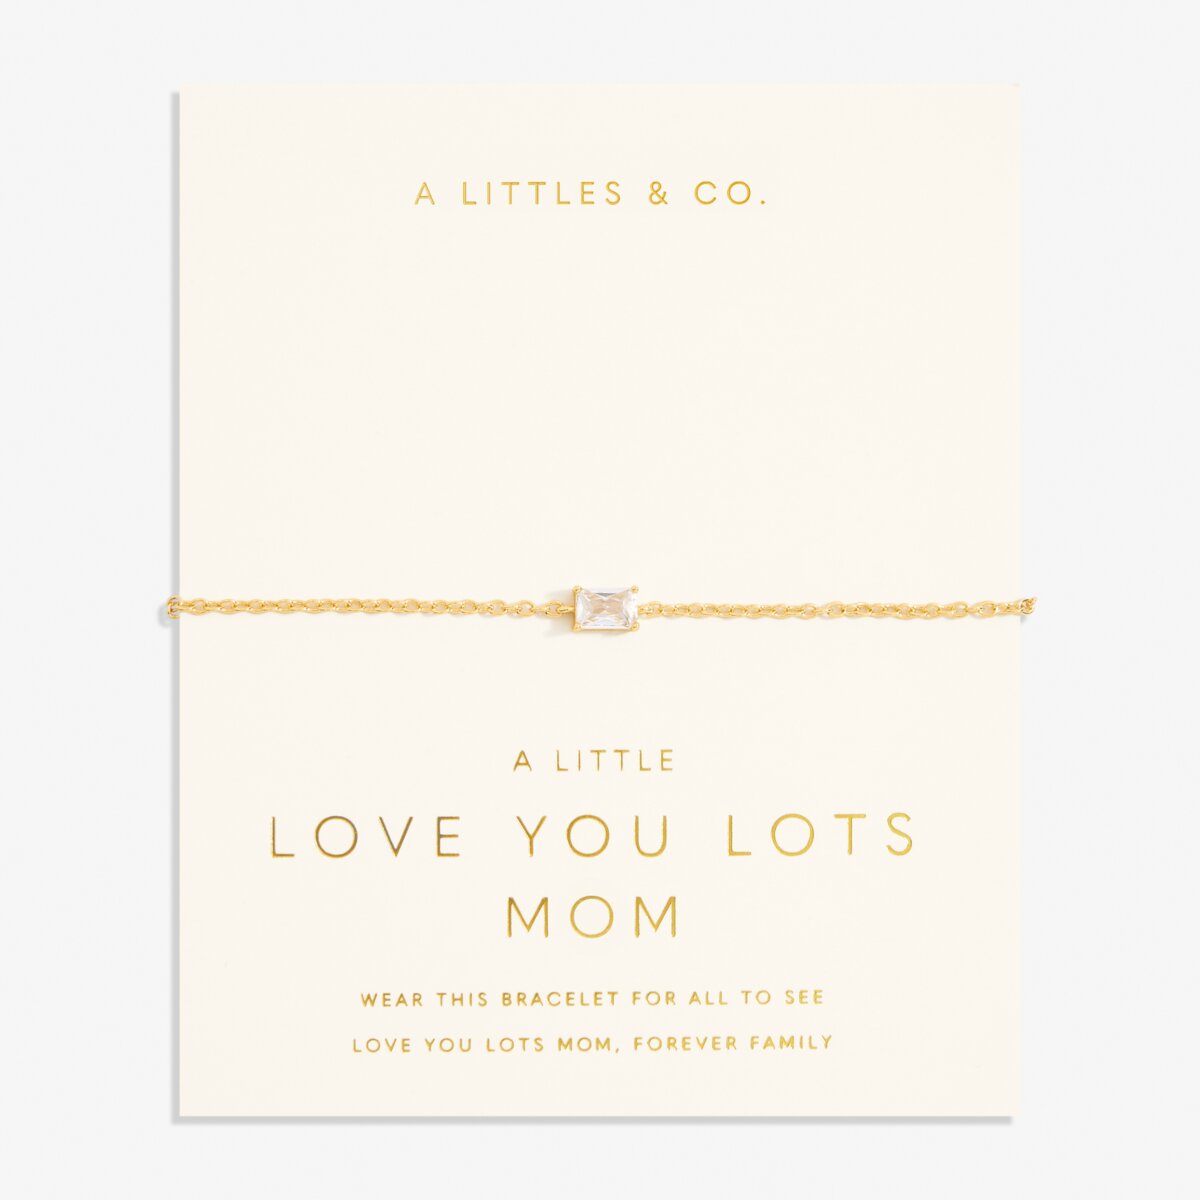 Love From Your Little Ones "Love You Lots Mom" Bracelet